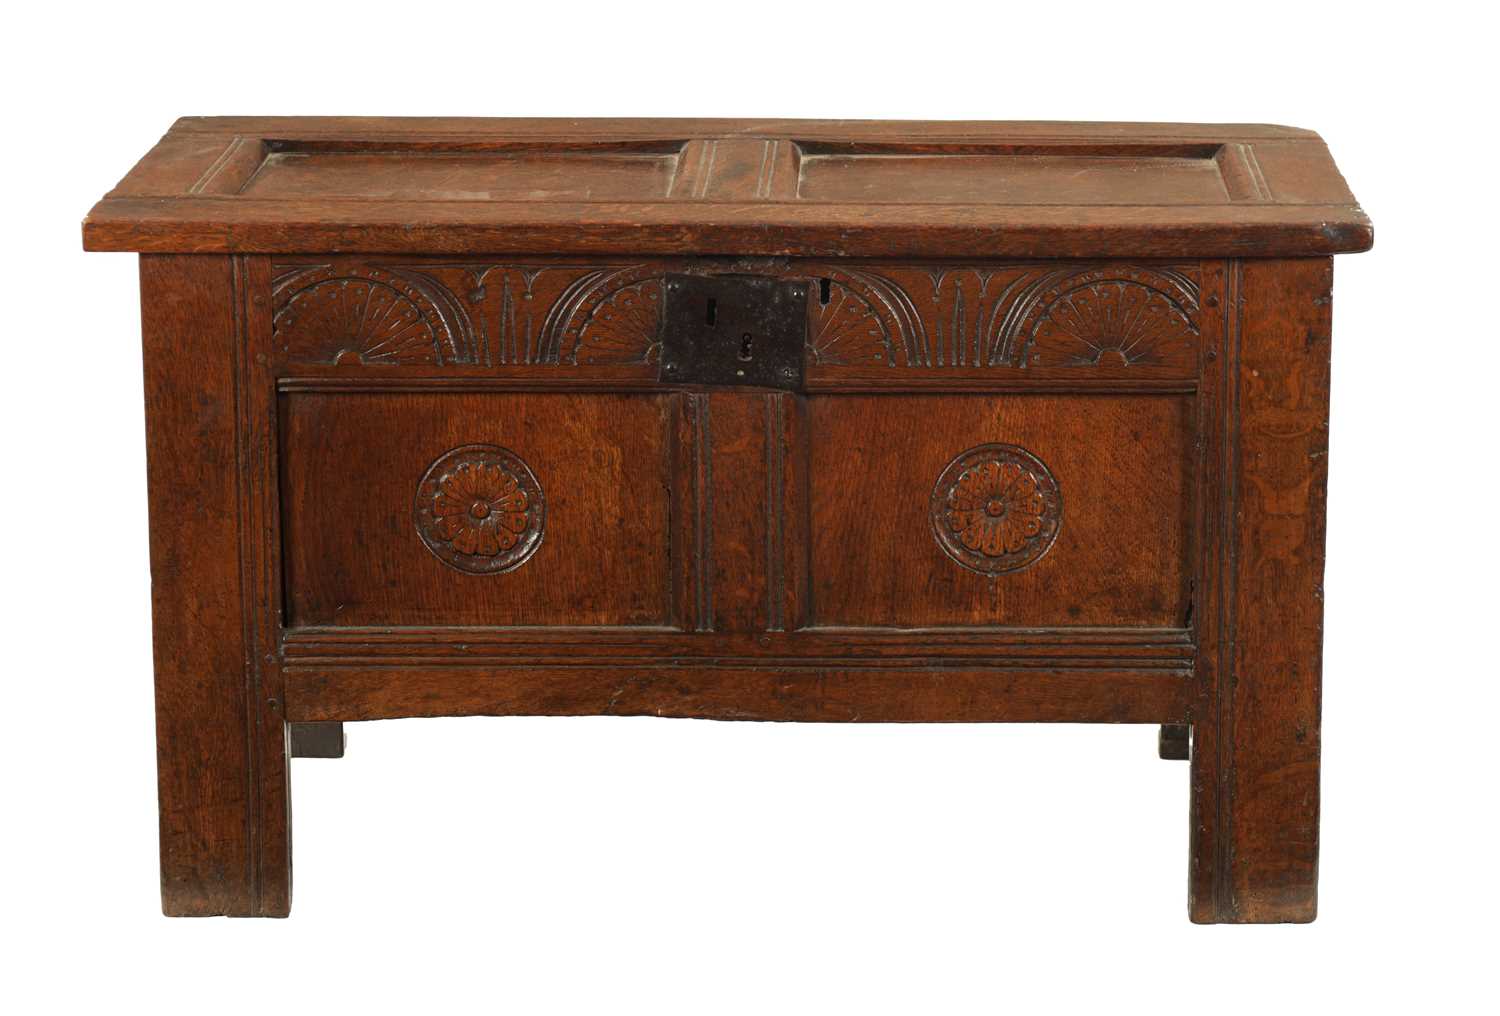 A SMALL 17TH CENTURY OAK TWO PANEL COFFER